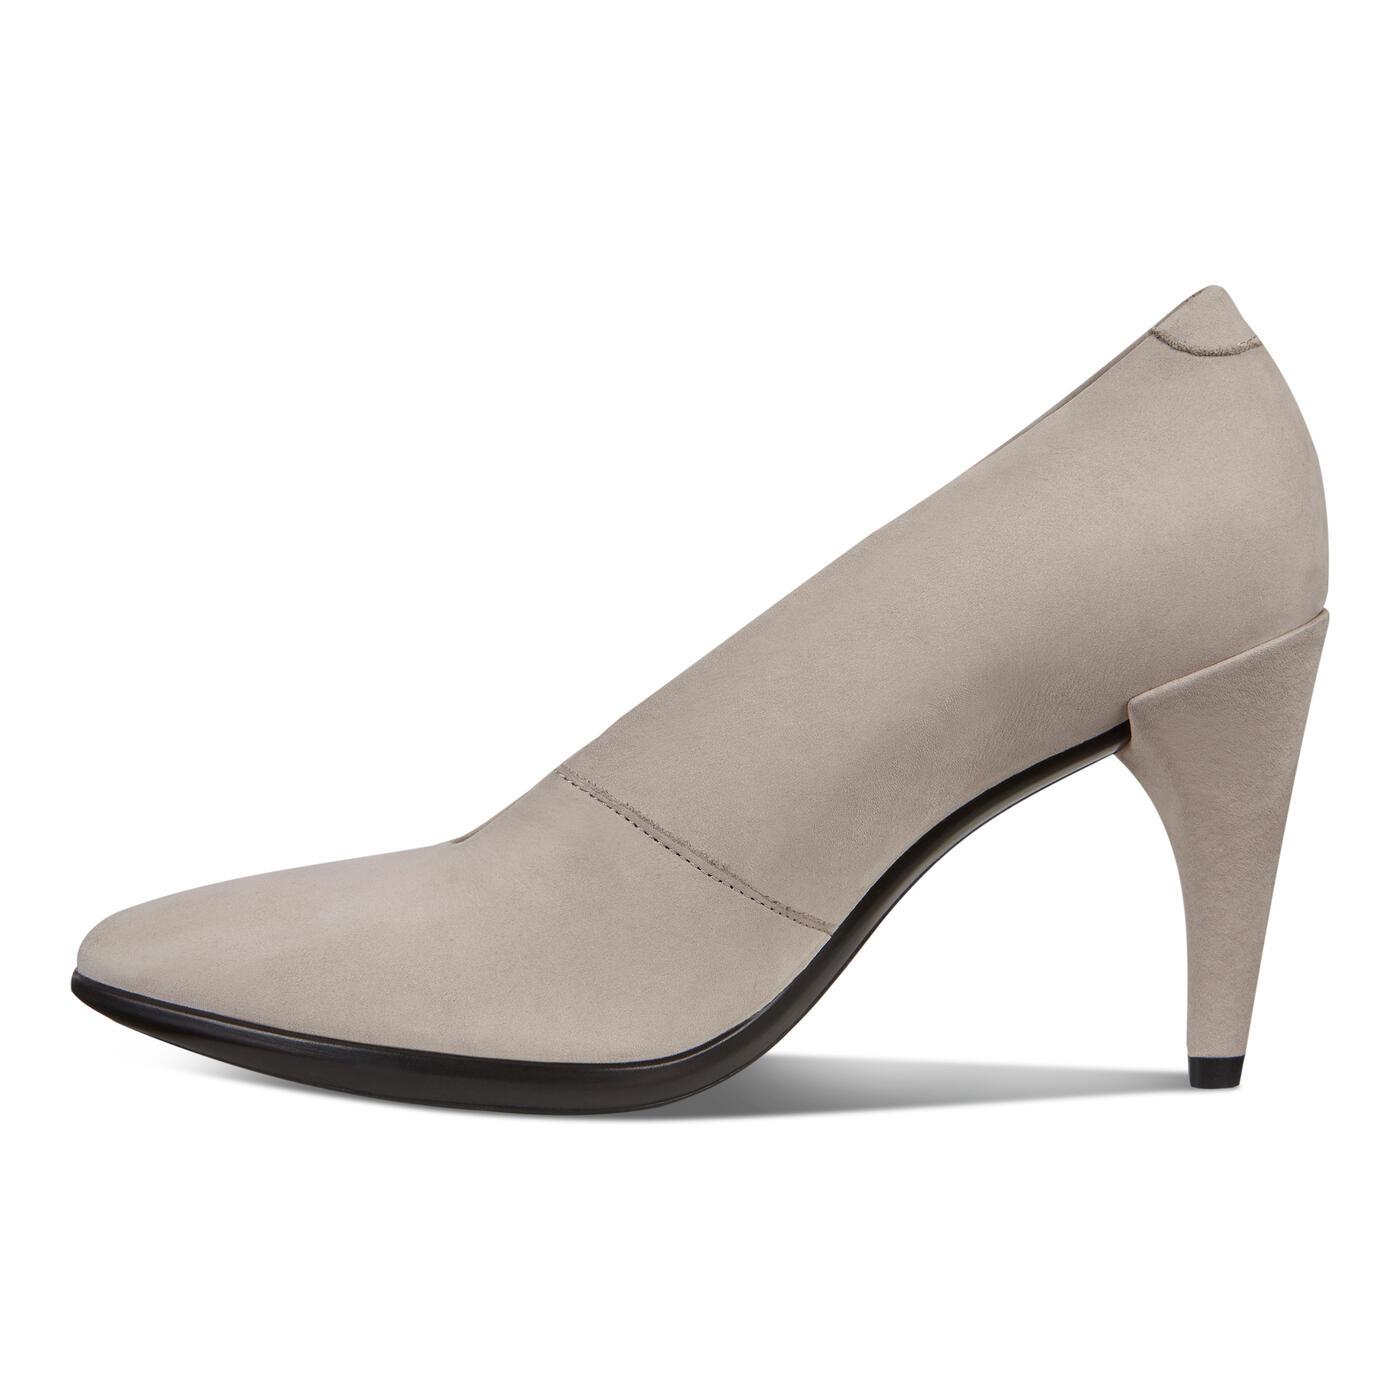 Ecco Shape 75 Pointy Pumps in Grey Rose (Gray) - Lyst